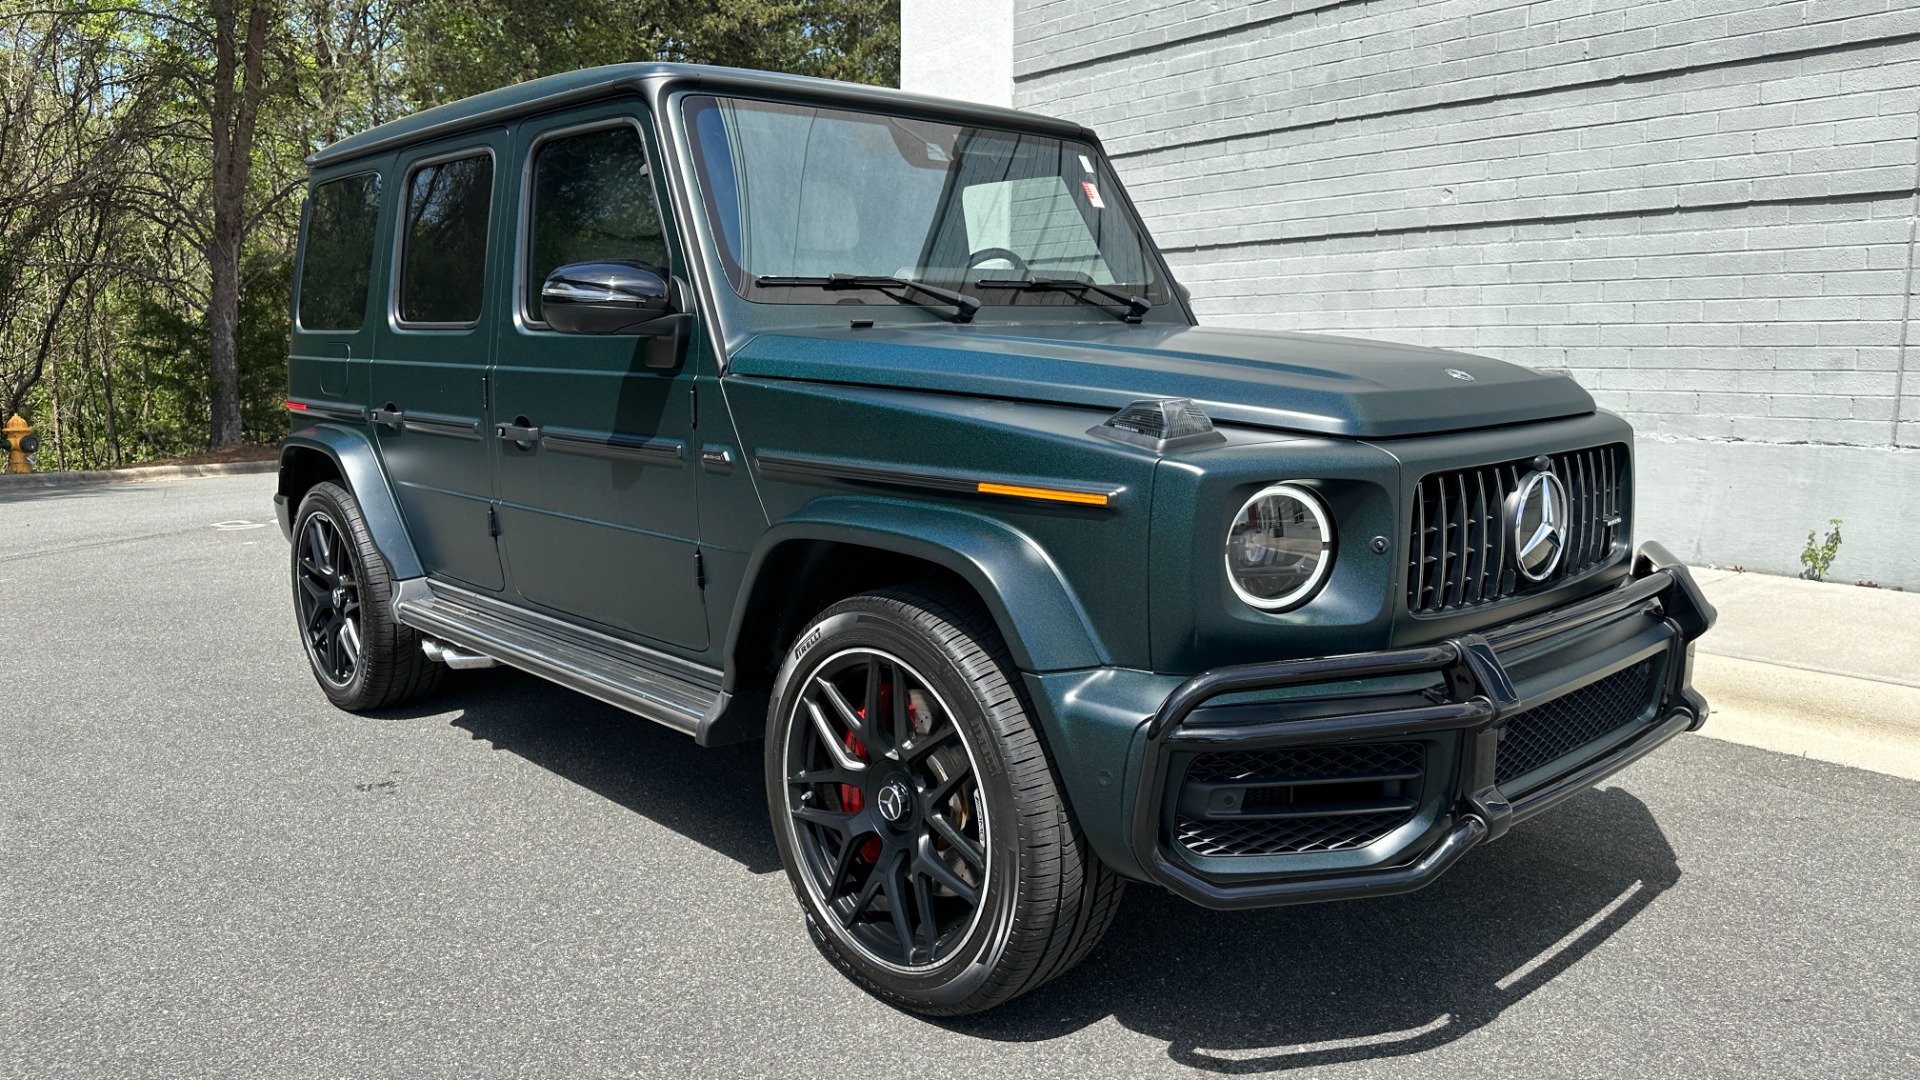 Used 2020 Mercedes-Benz G-Class AMG G63 DESIGNO INTERIOR / AMG NIGHT PKG / CARBON FIBER TRIM for sale $165,999 at Formula Imports in Charlotte NC 28227 5